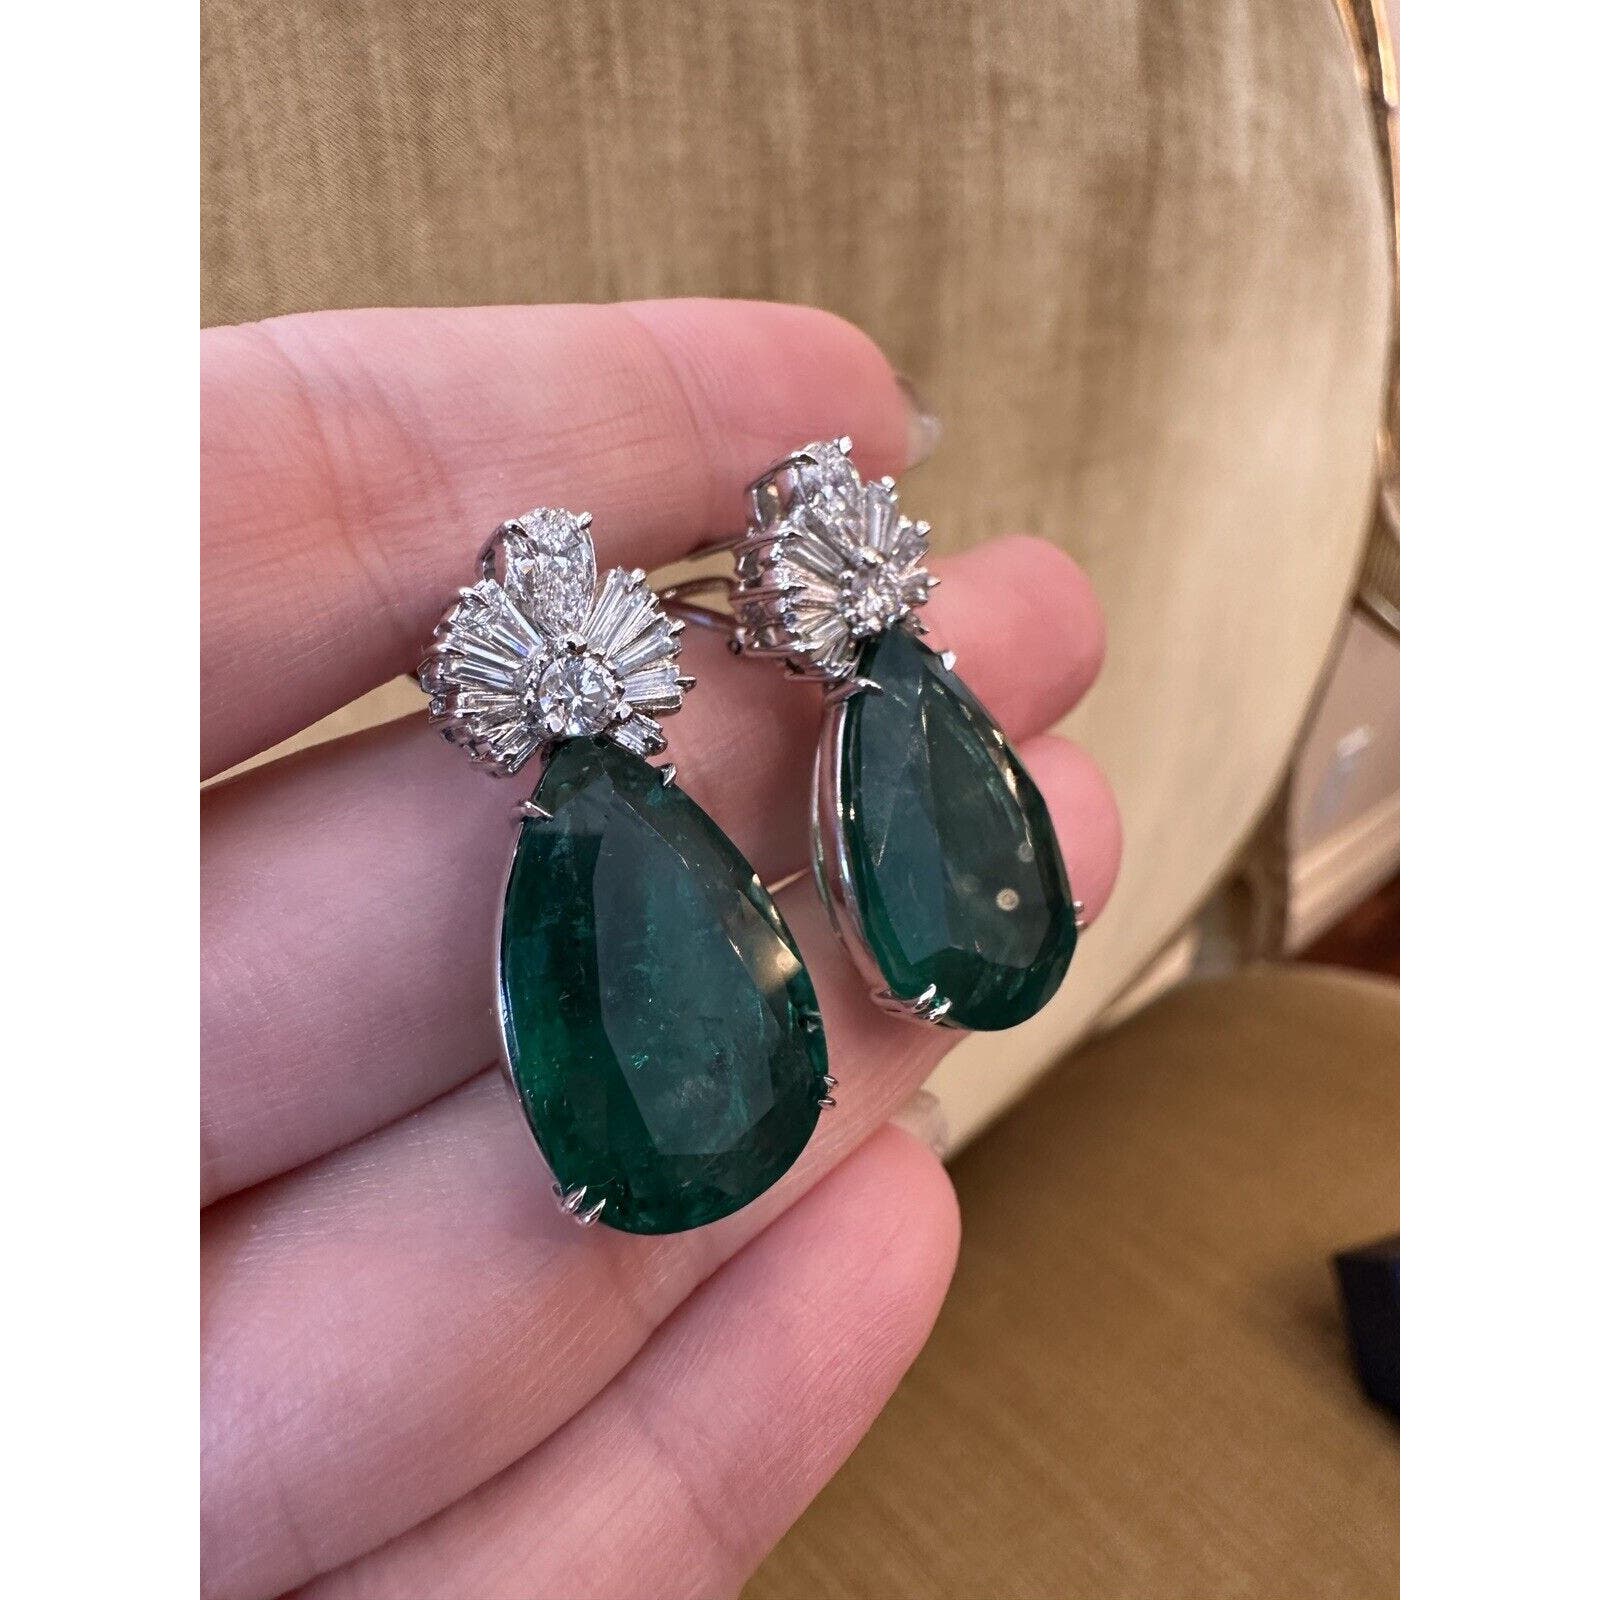 GIA Pear Emeralds 31.17 cttw and Diamond Earrings in 18k White Gold - HM2483B